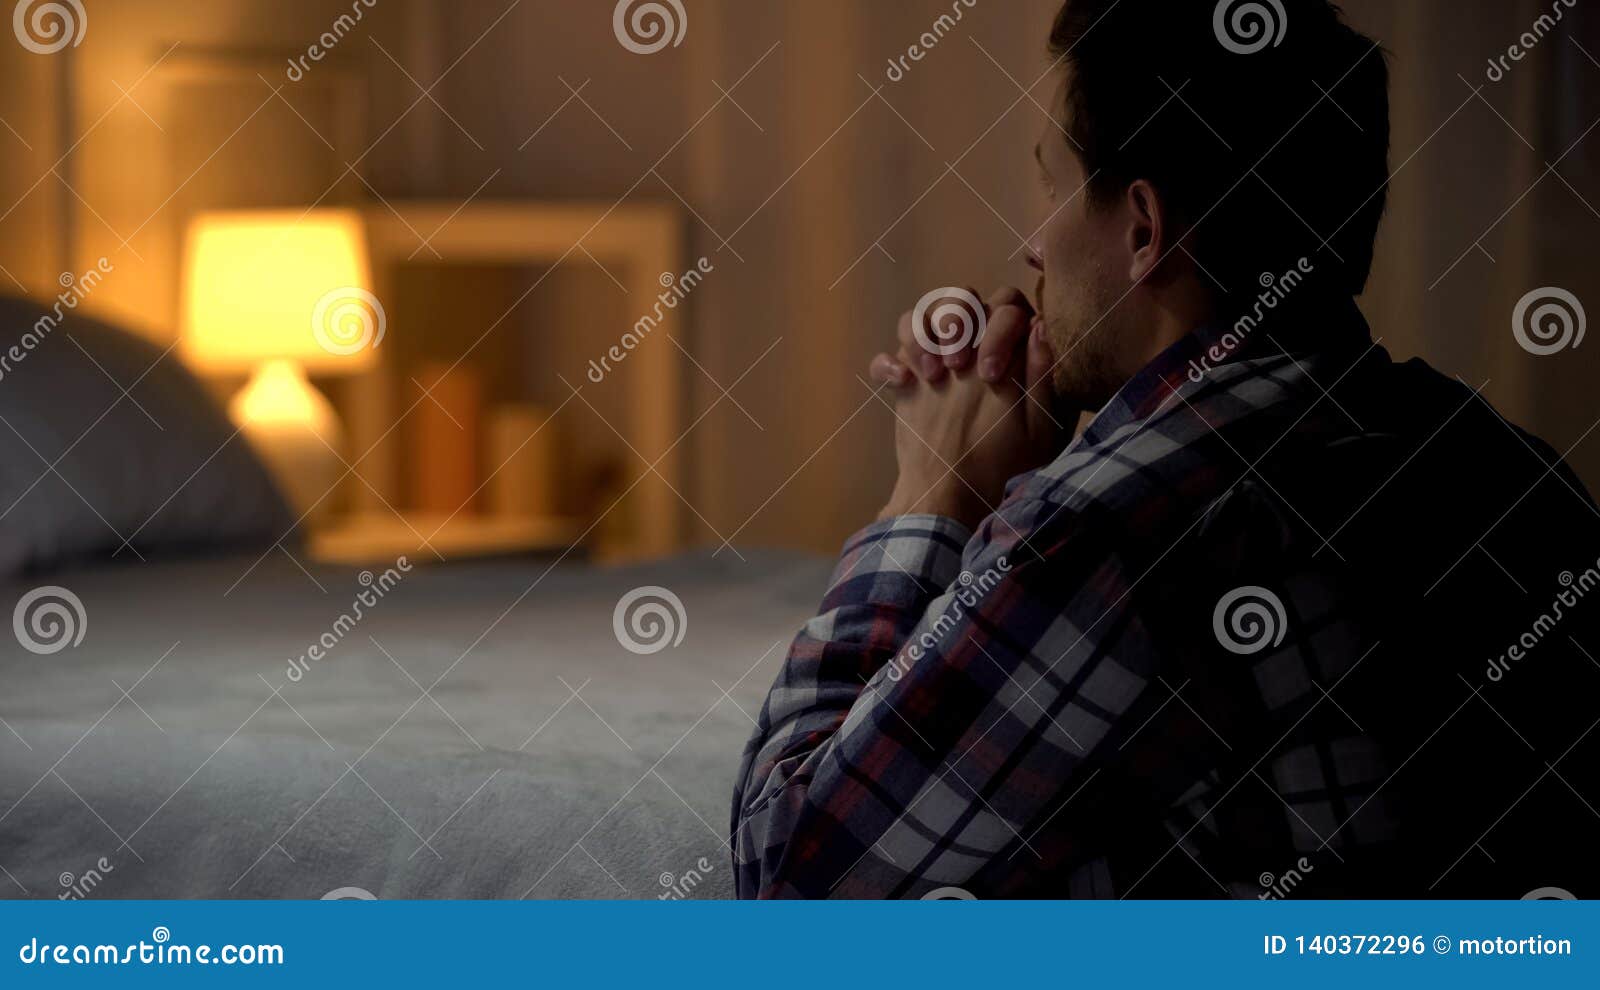 man kneeling near bed and praying to god, thanking for life opportunities